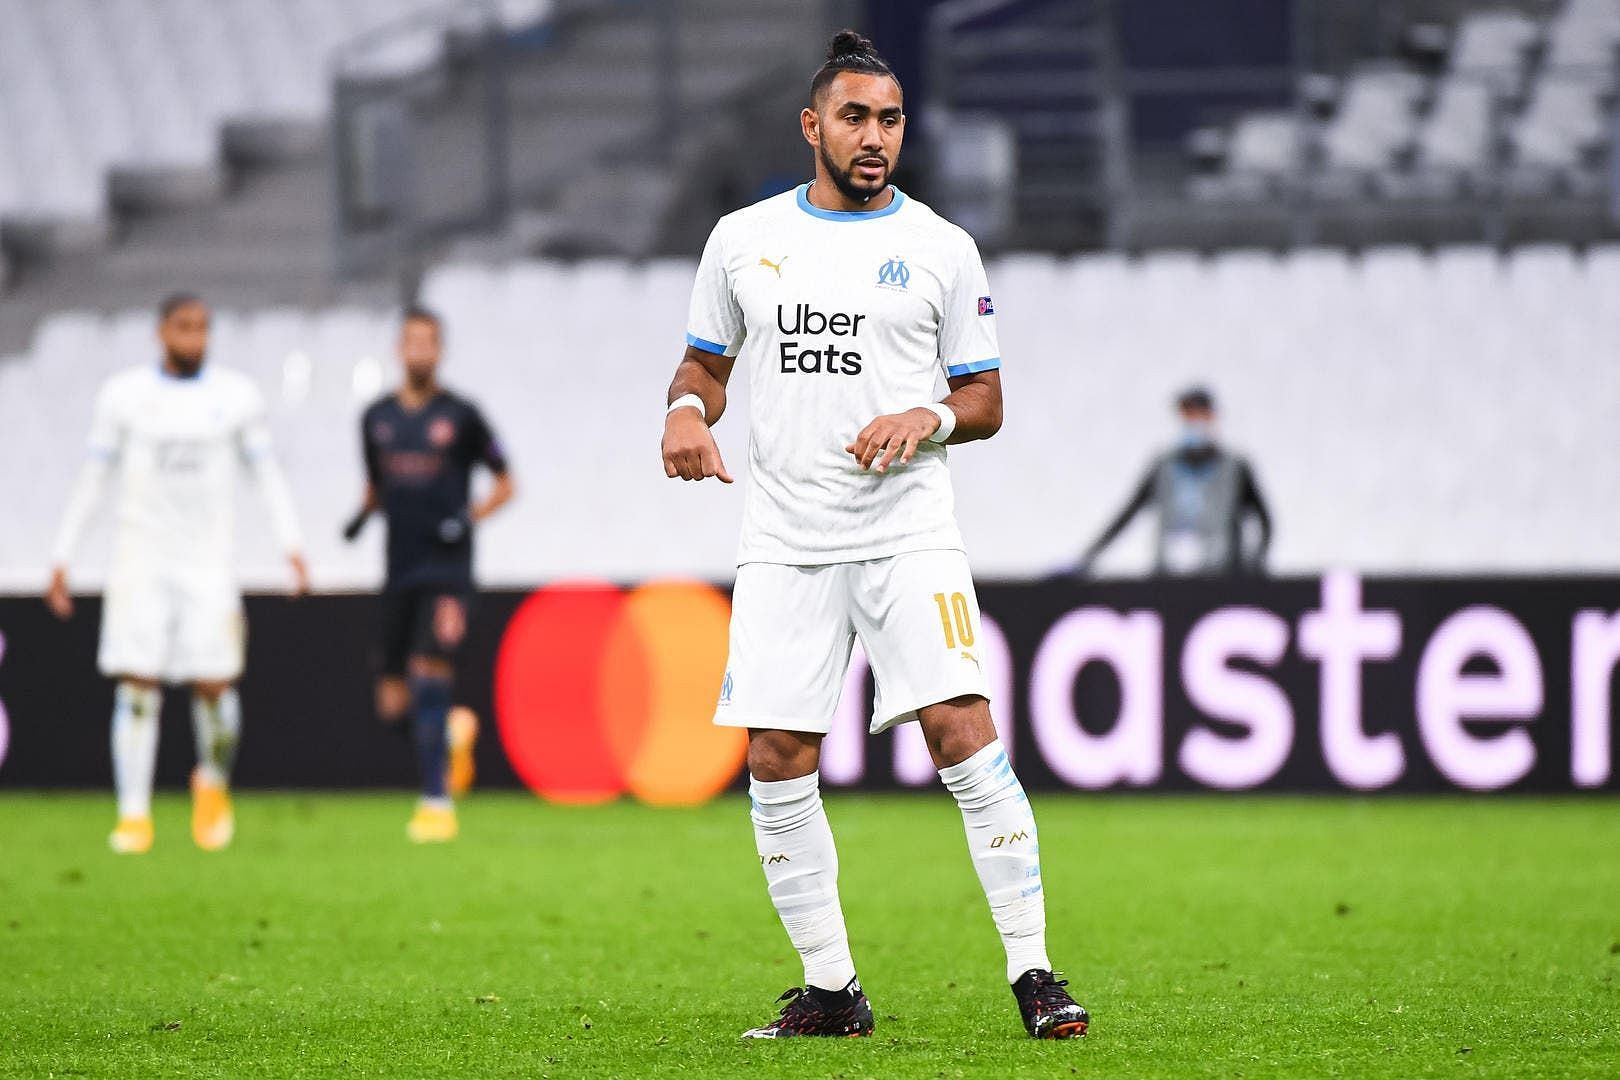 Payet has been the biggest attacking inspiration for Marseille this season.